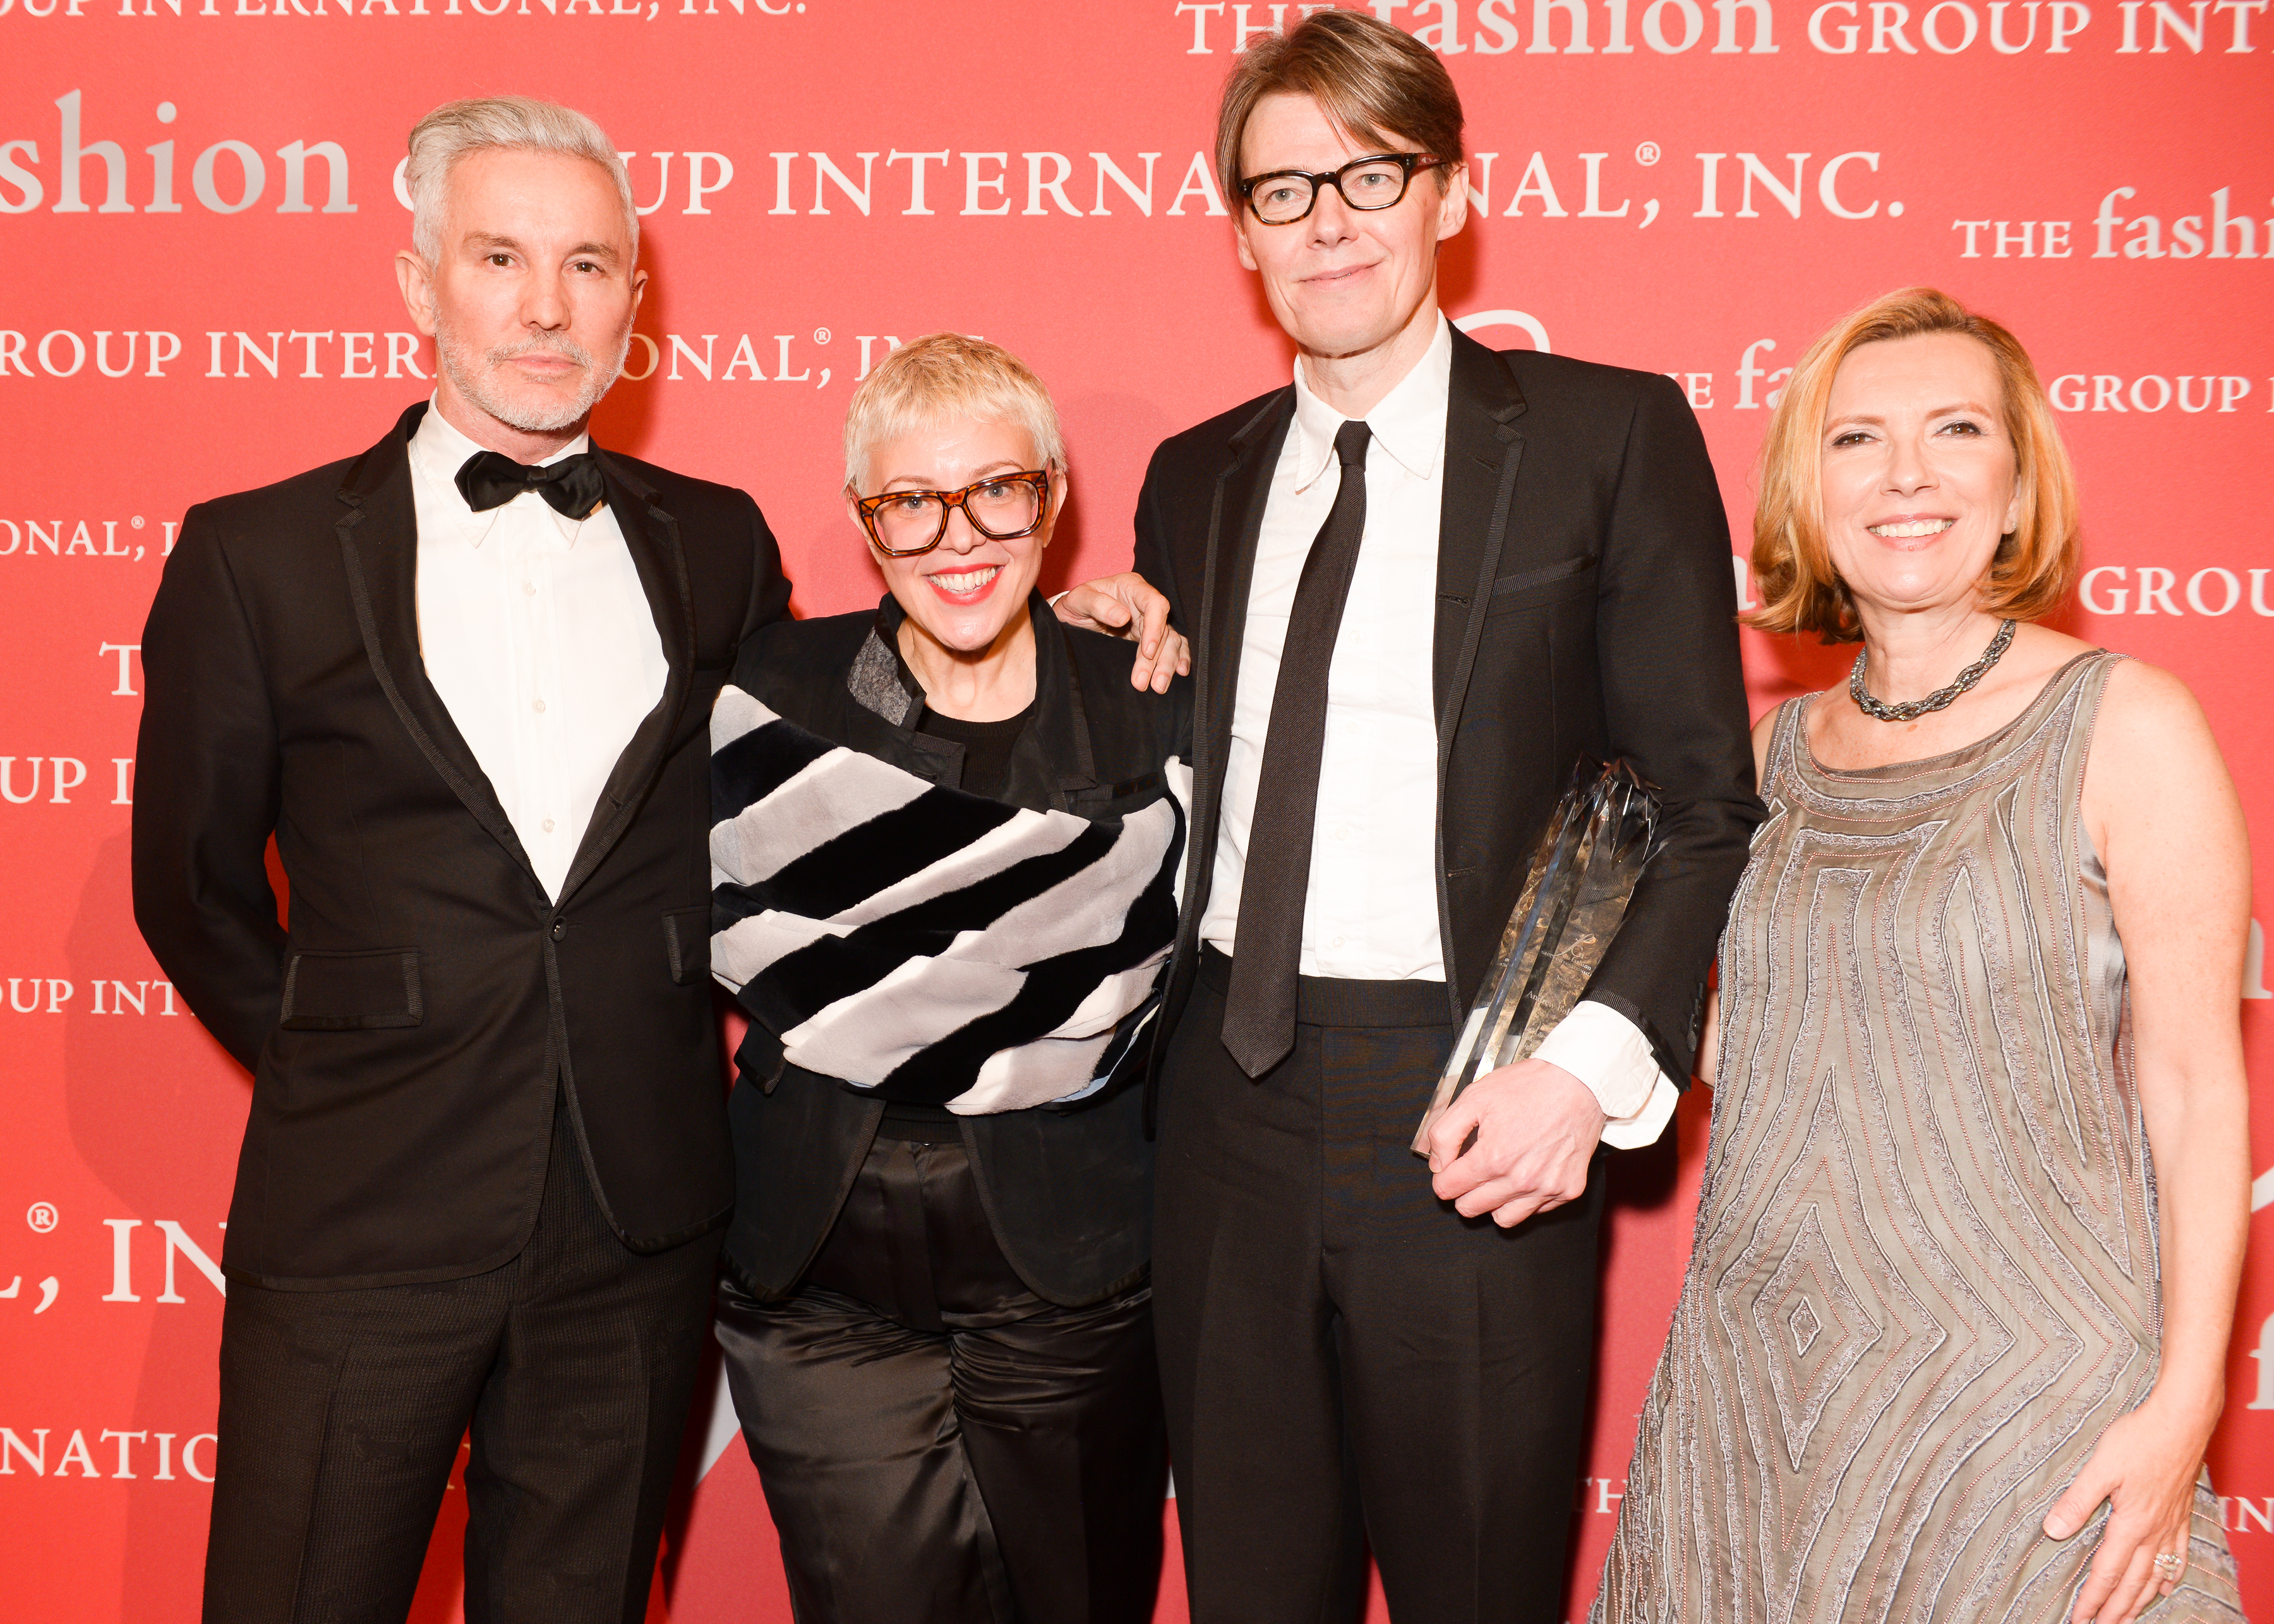 Pierre-Yves Roussel, Tory Burch, Stefano Tonchi at THE FASHION GROUP  INTERNATIONAL: 32ND ANNUAL NIGHT OF